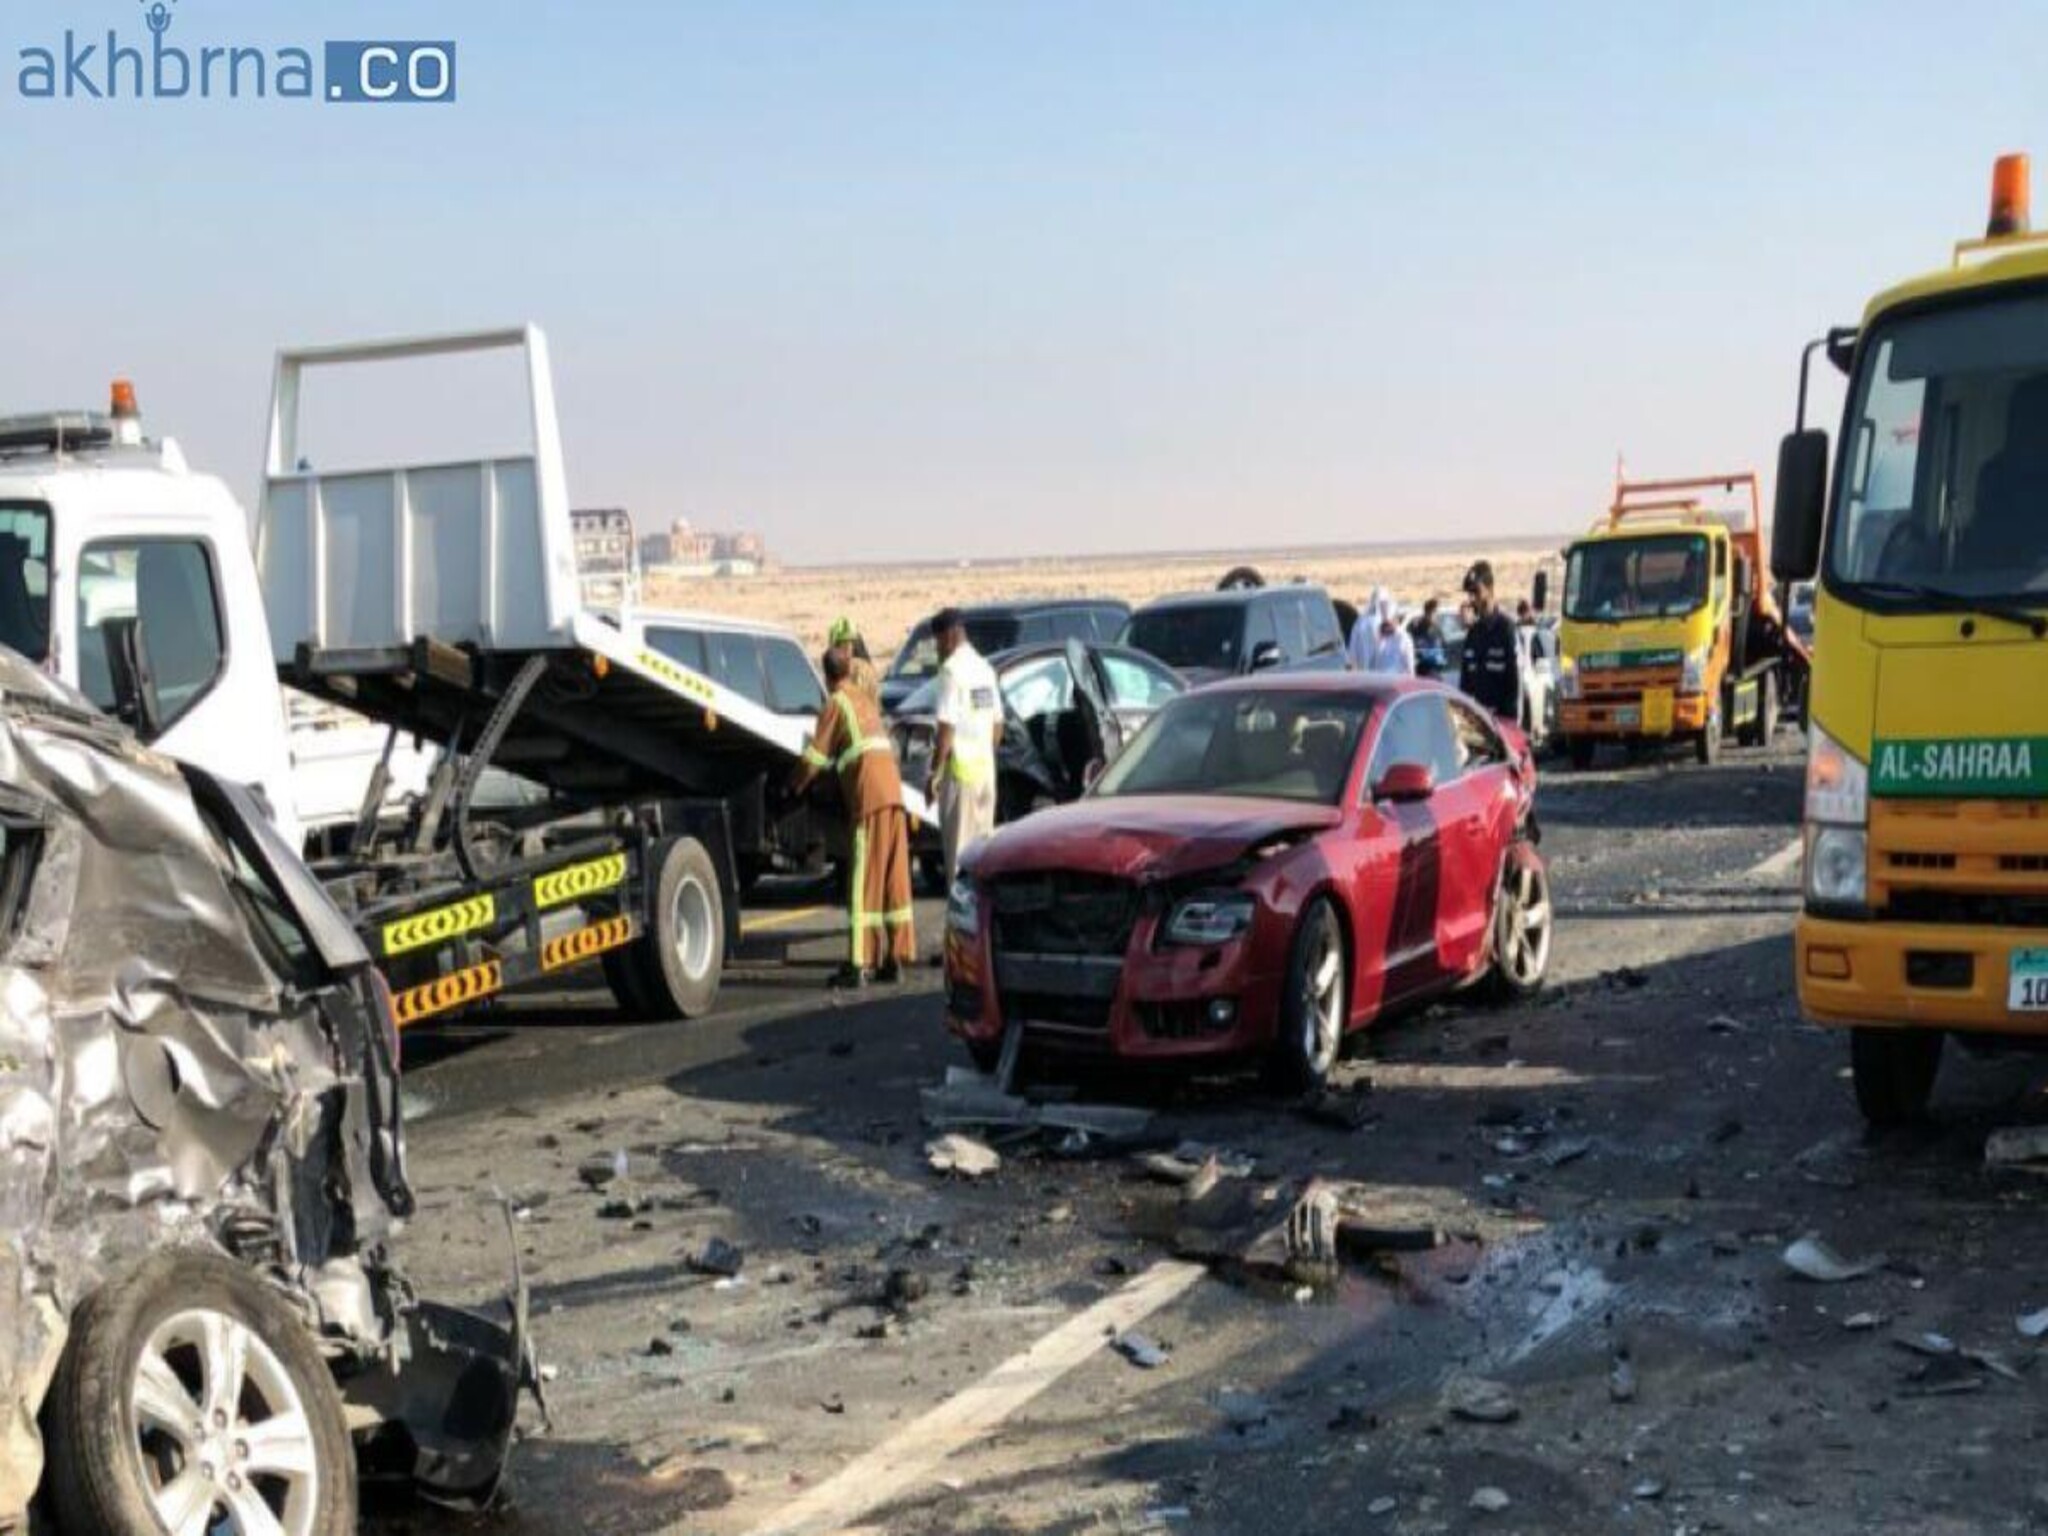 UAE: Multiple Arrests After Road Racing Causes Accident in Fujairah